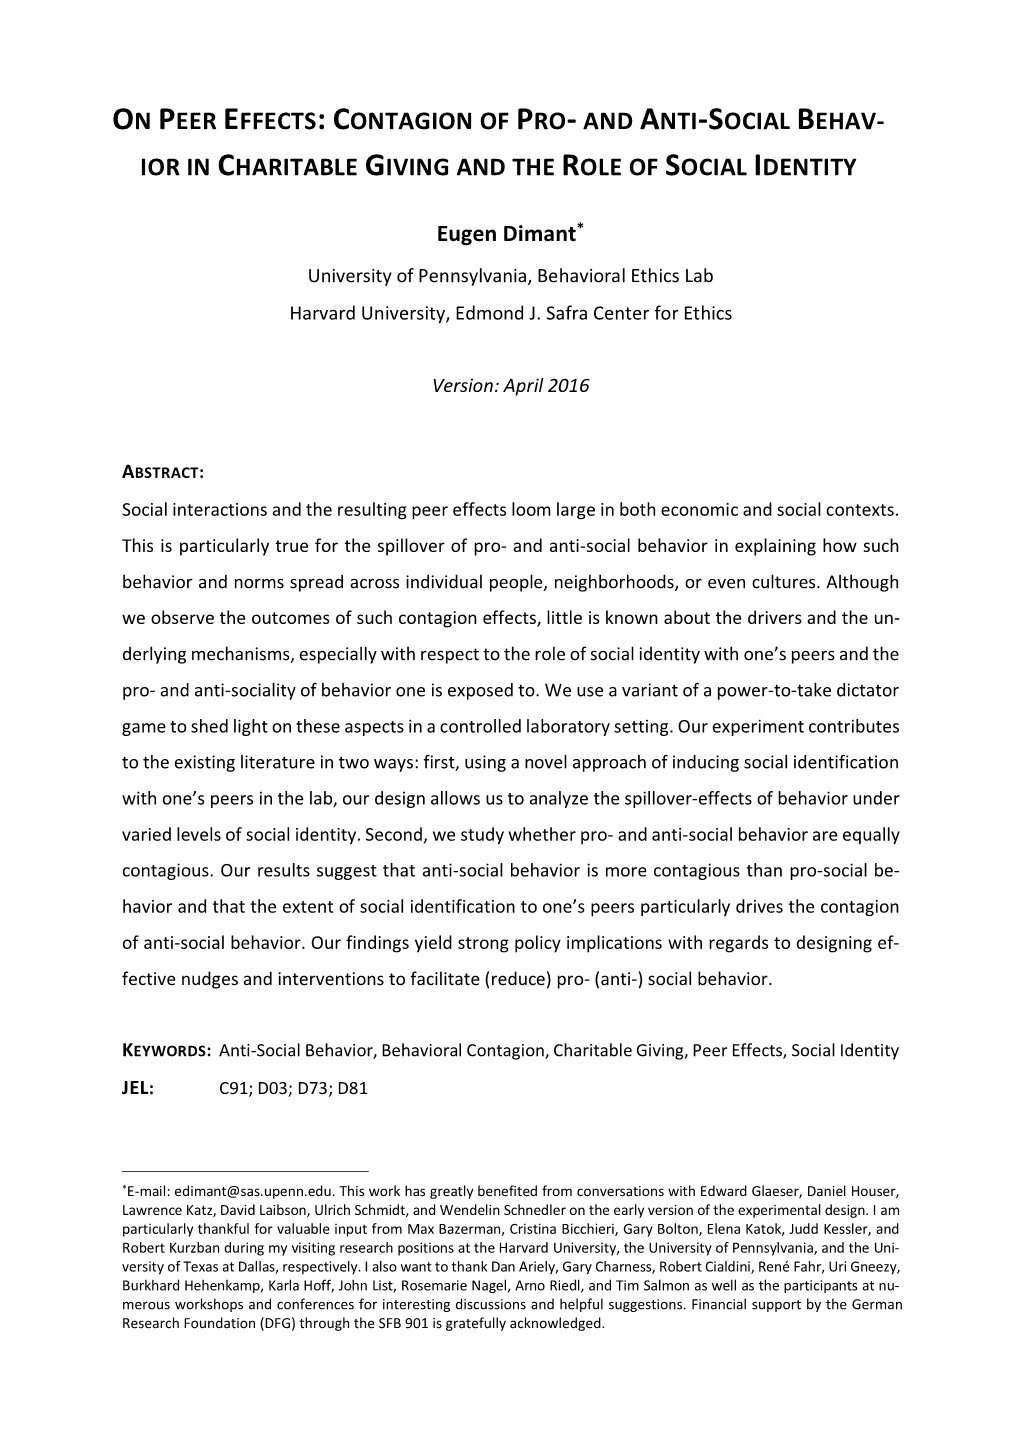 On Peer Effects: Contagion of Pro- and Anti-Social Behav- Ior in Charitable Giving and the Role of Social Identity